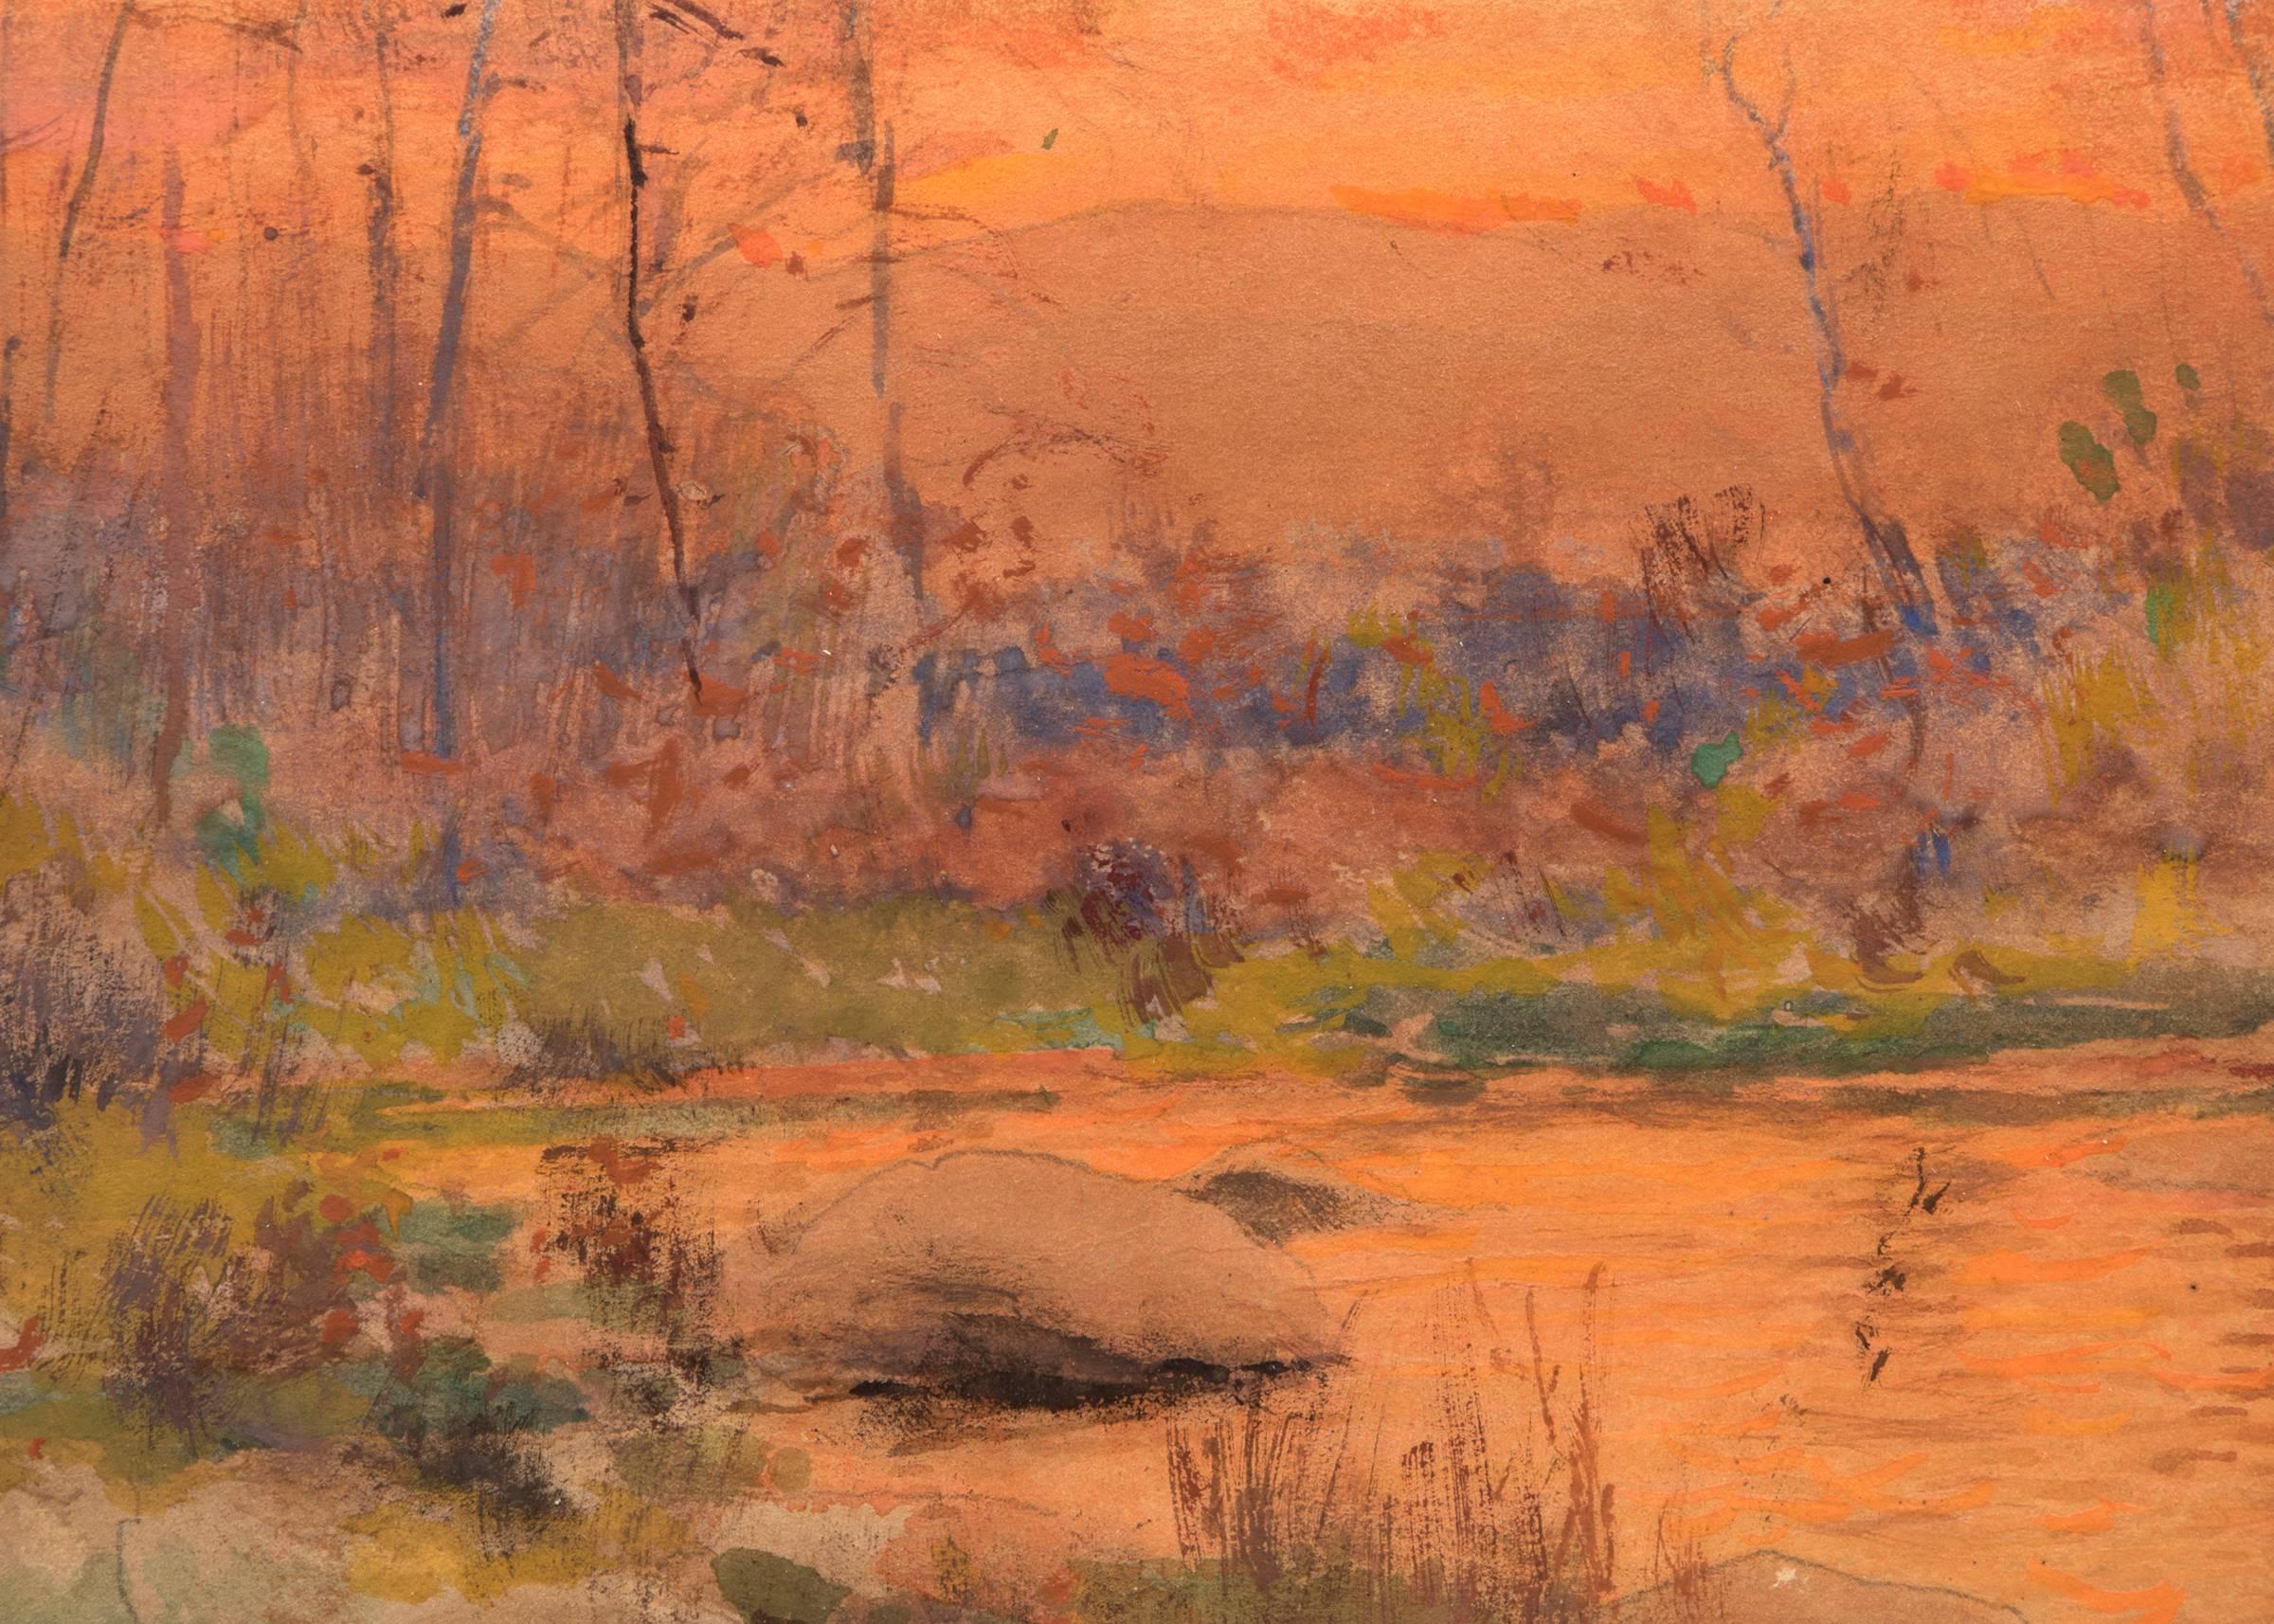 Untitled (River at Sunset, Colorado) - Hudson River School Painting by Charles Partridge Adams